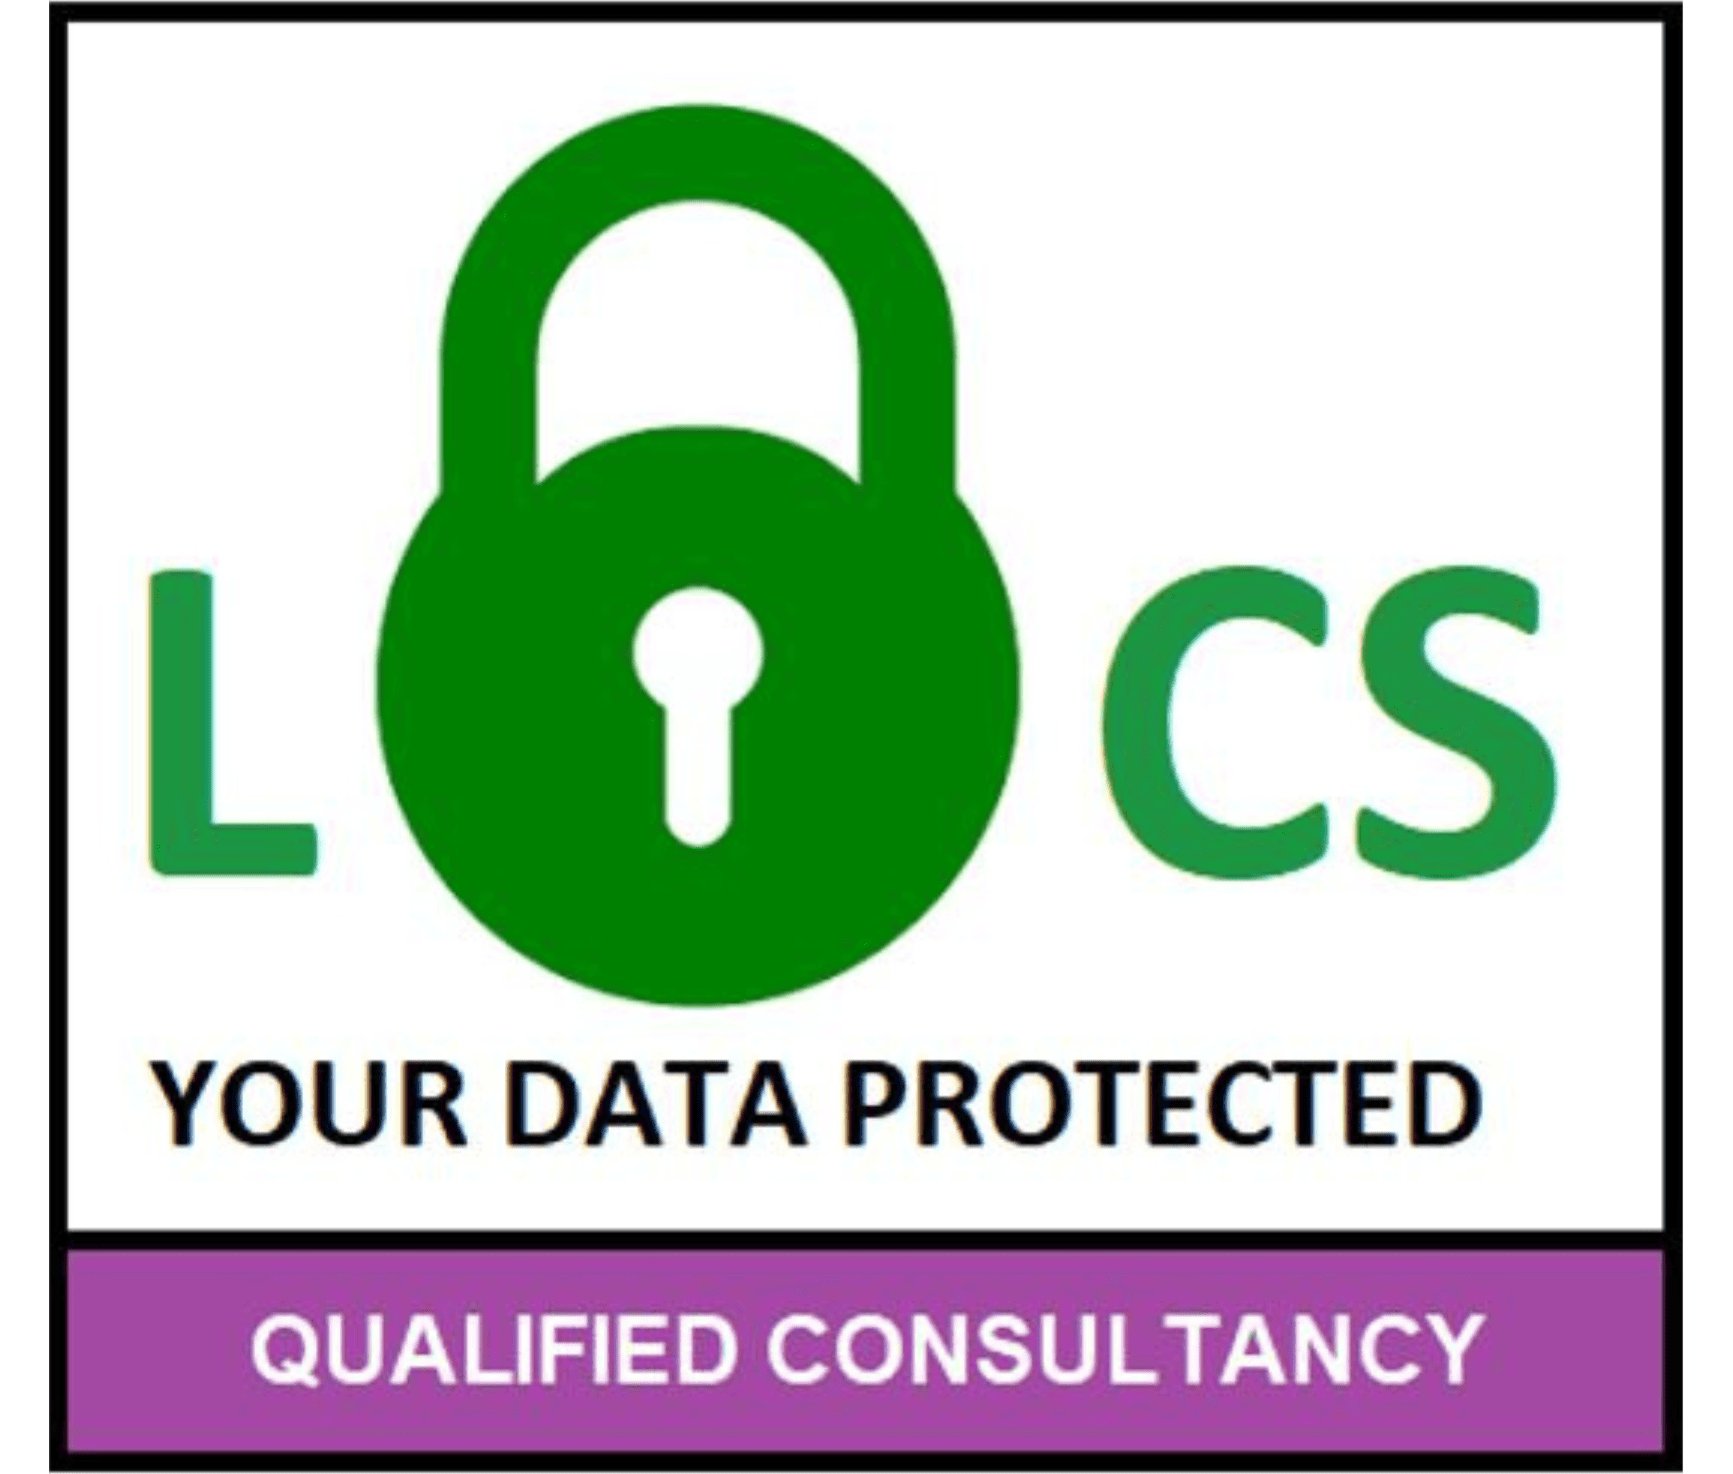 View - Oyster IMS joins LOCS:23 Approved Consultancies to assist law firms and legal departments with GDPR compliance